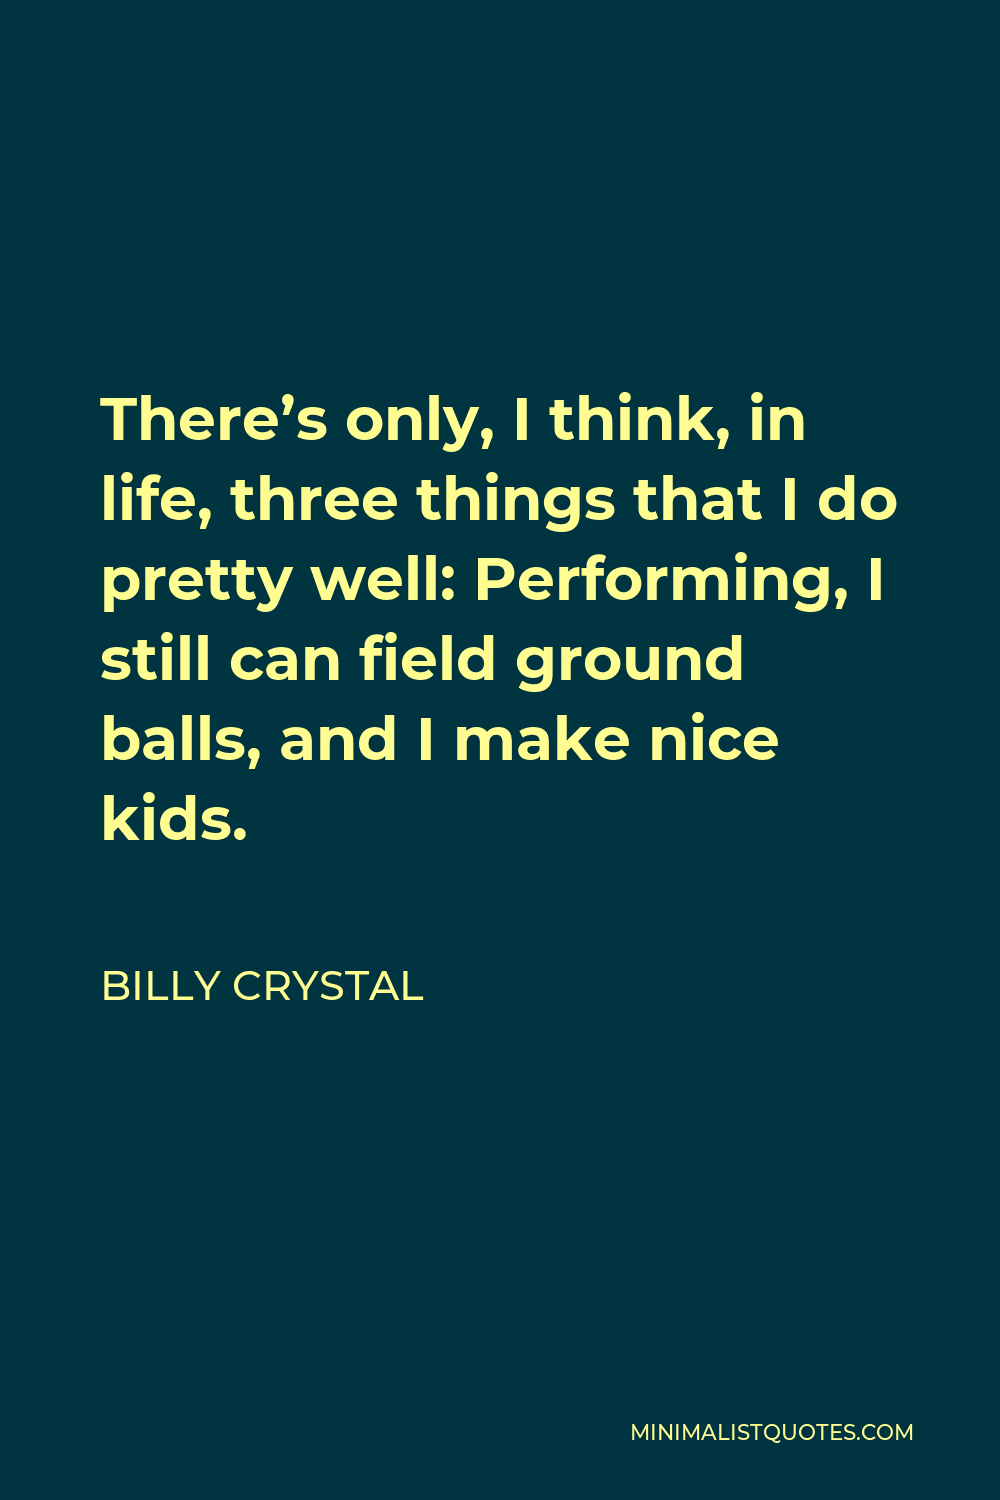 Billy Crystal Quote - There’s only, I think, in life, three things that I do pretty well: Performing, I still can field ground balls, and I make nice kids.